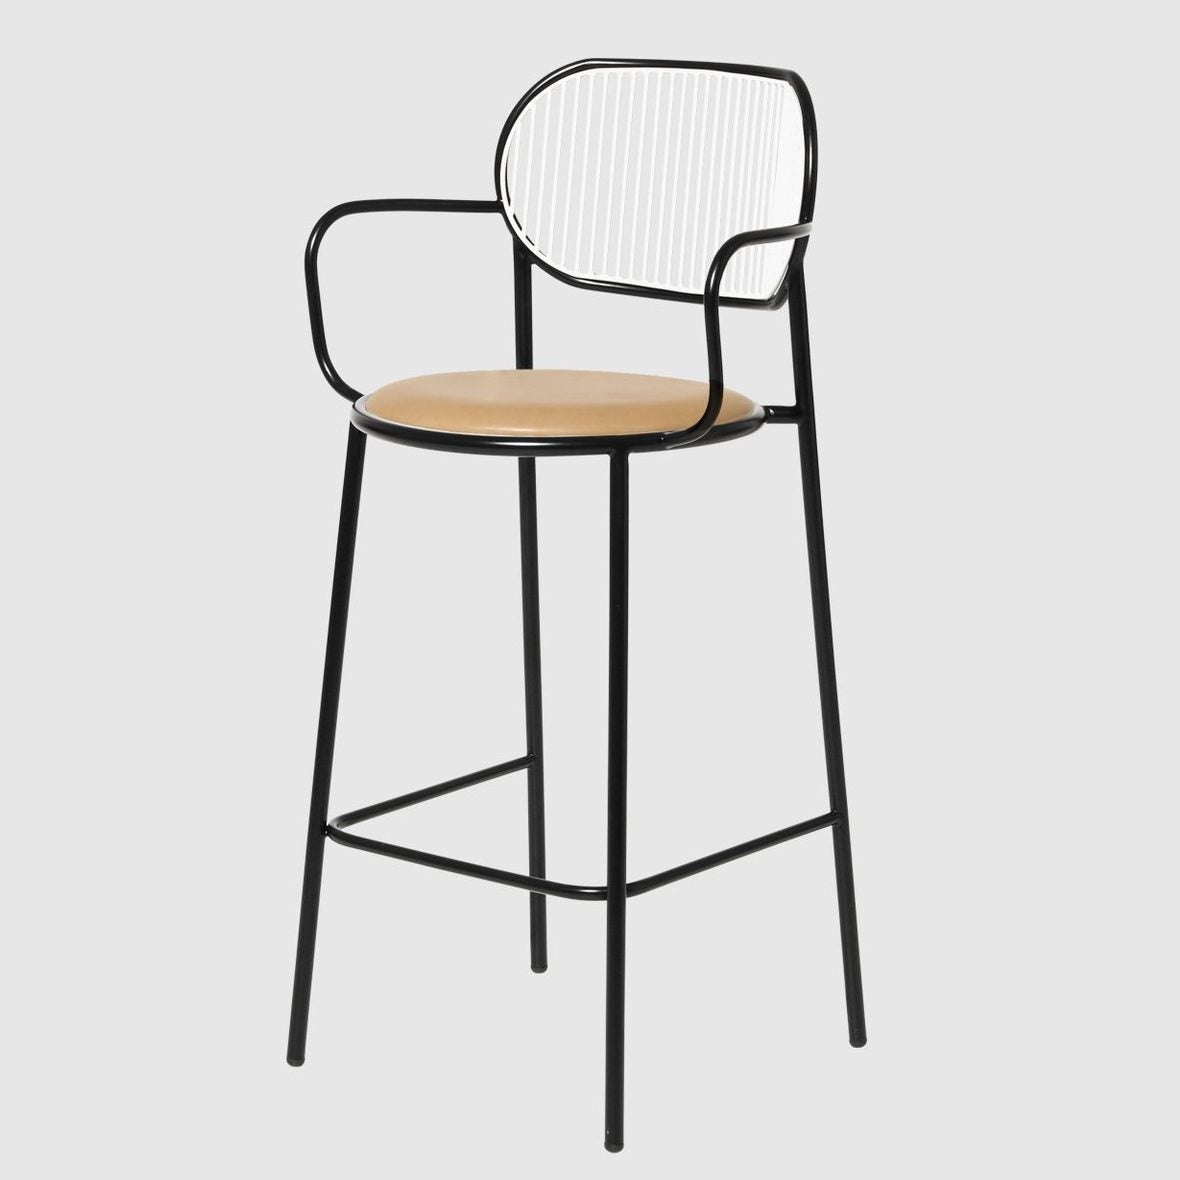 website-thumbs-piper-bar-stool-armrests-wht-in-blk-leather-seat-pad-gry-bkgd-d-lr_52cfeef4-1996-4d1c-89c8-e2f370f7034a_1920x